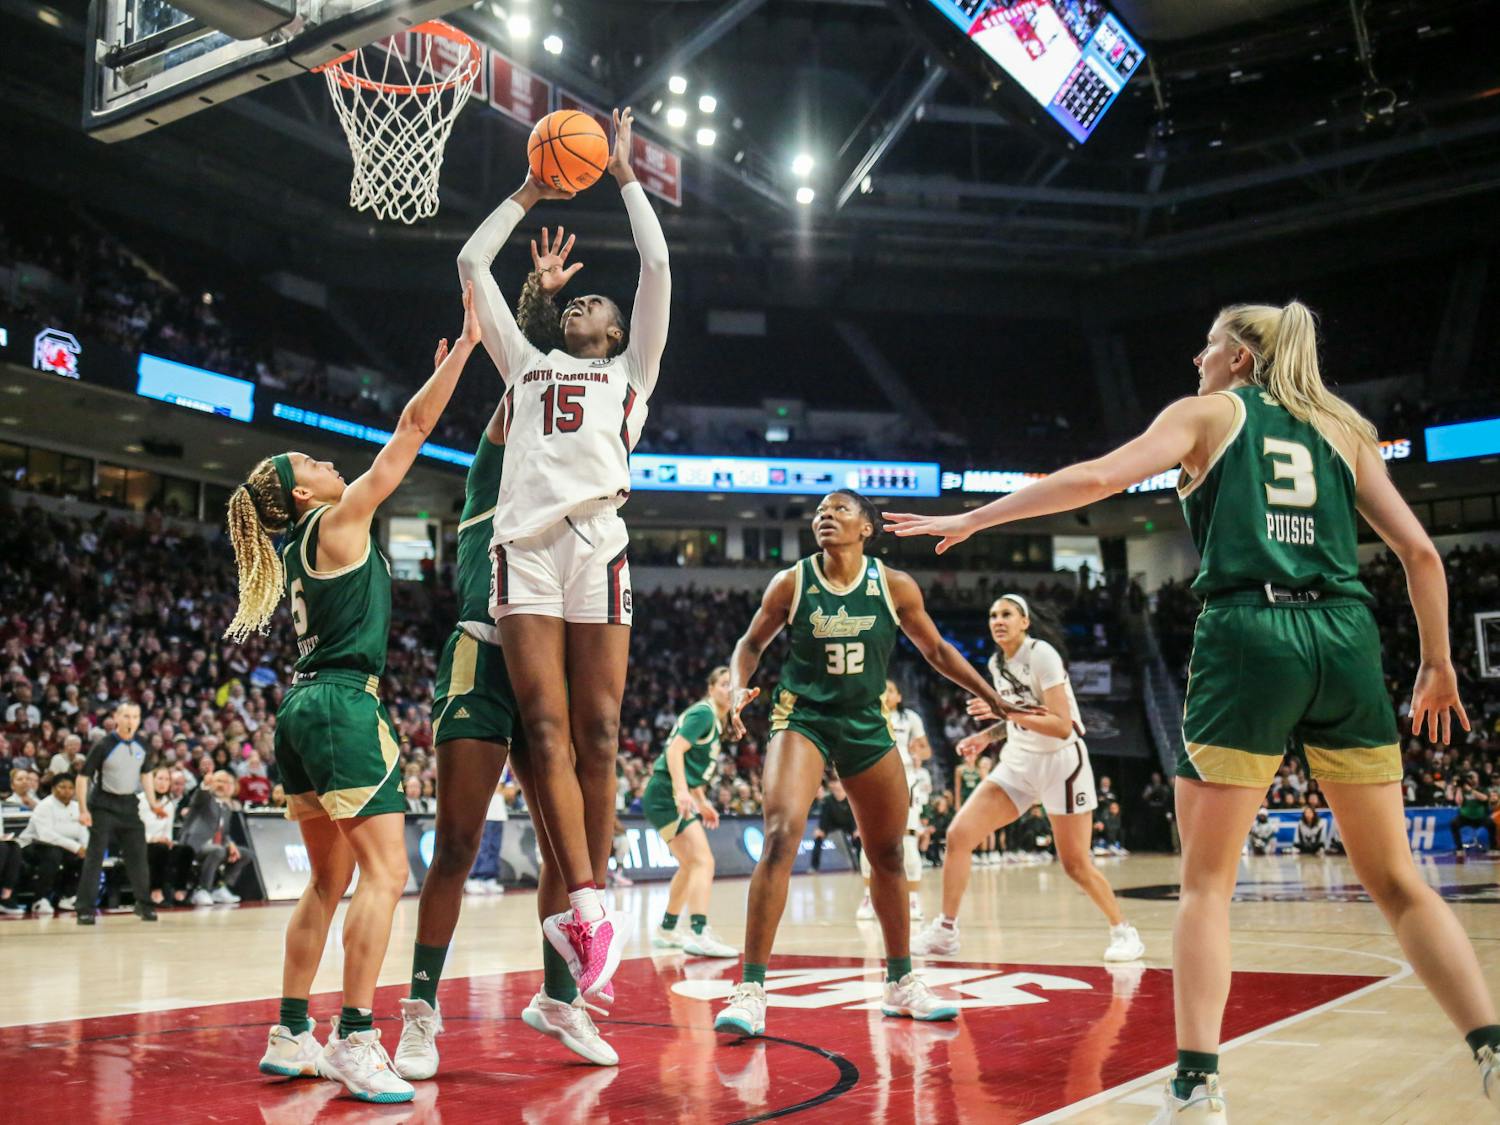 Senior forward Laeticia Amihere puts up a shot during South Carolina’s game against South Florida in round two of the NCAA tournament at Colonial Life Arena on March 19, 2023. The Gamecocks defeated the Bulls 76-45.